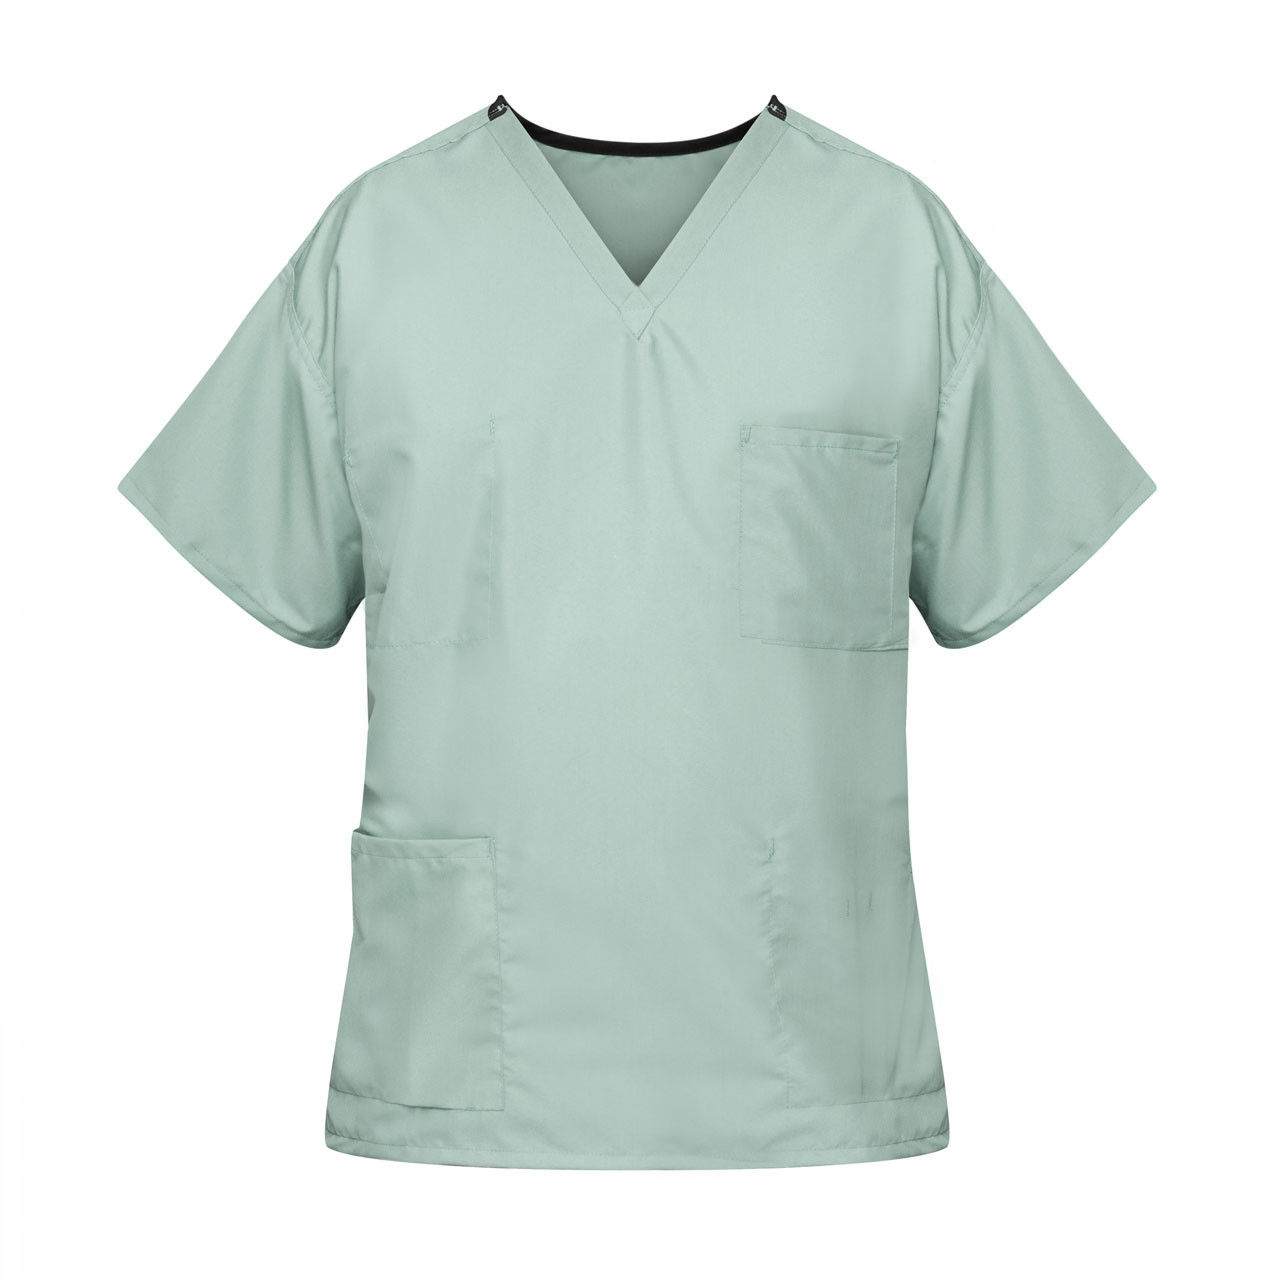 Where is the lower front pocket on the misty green scrubs?